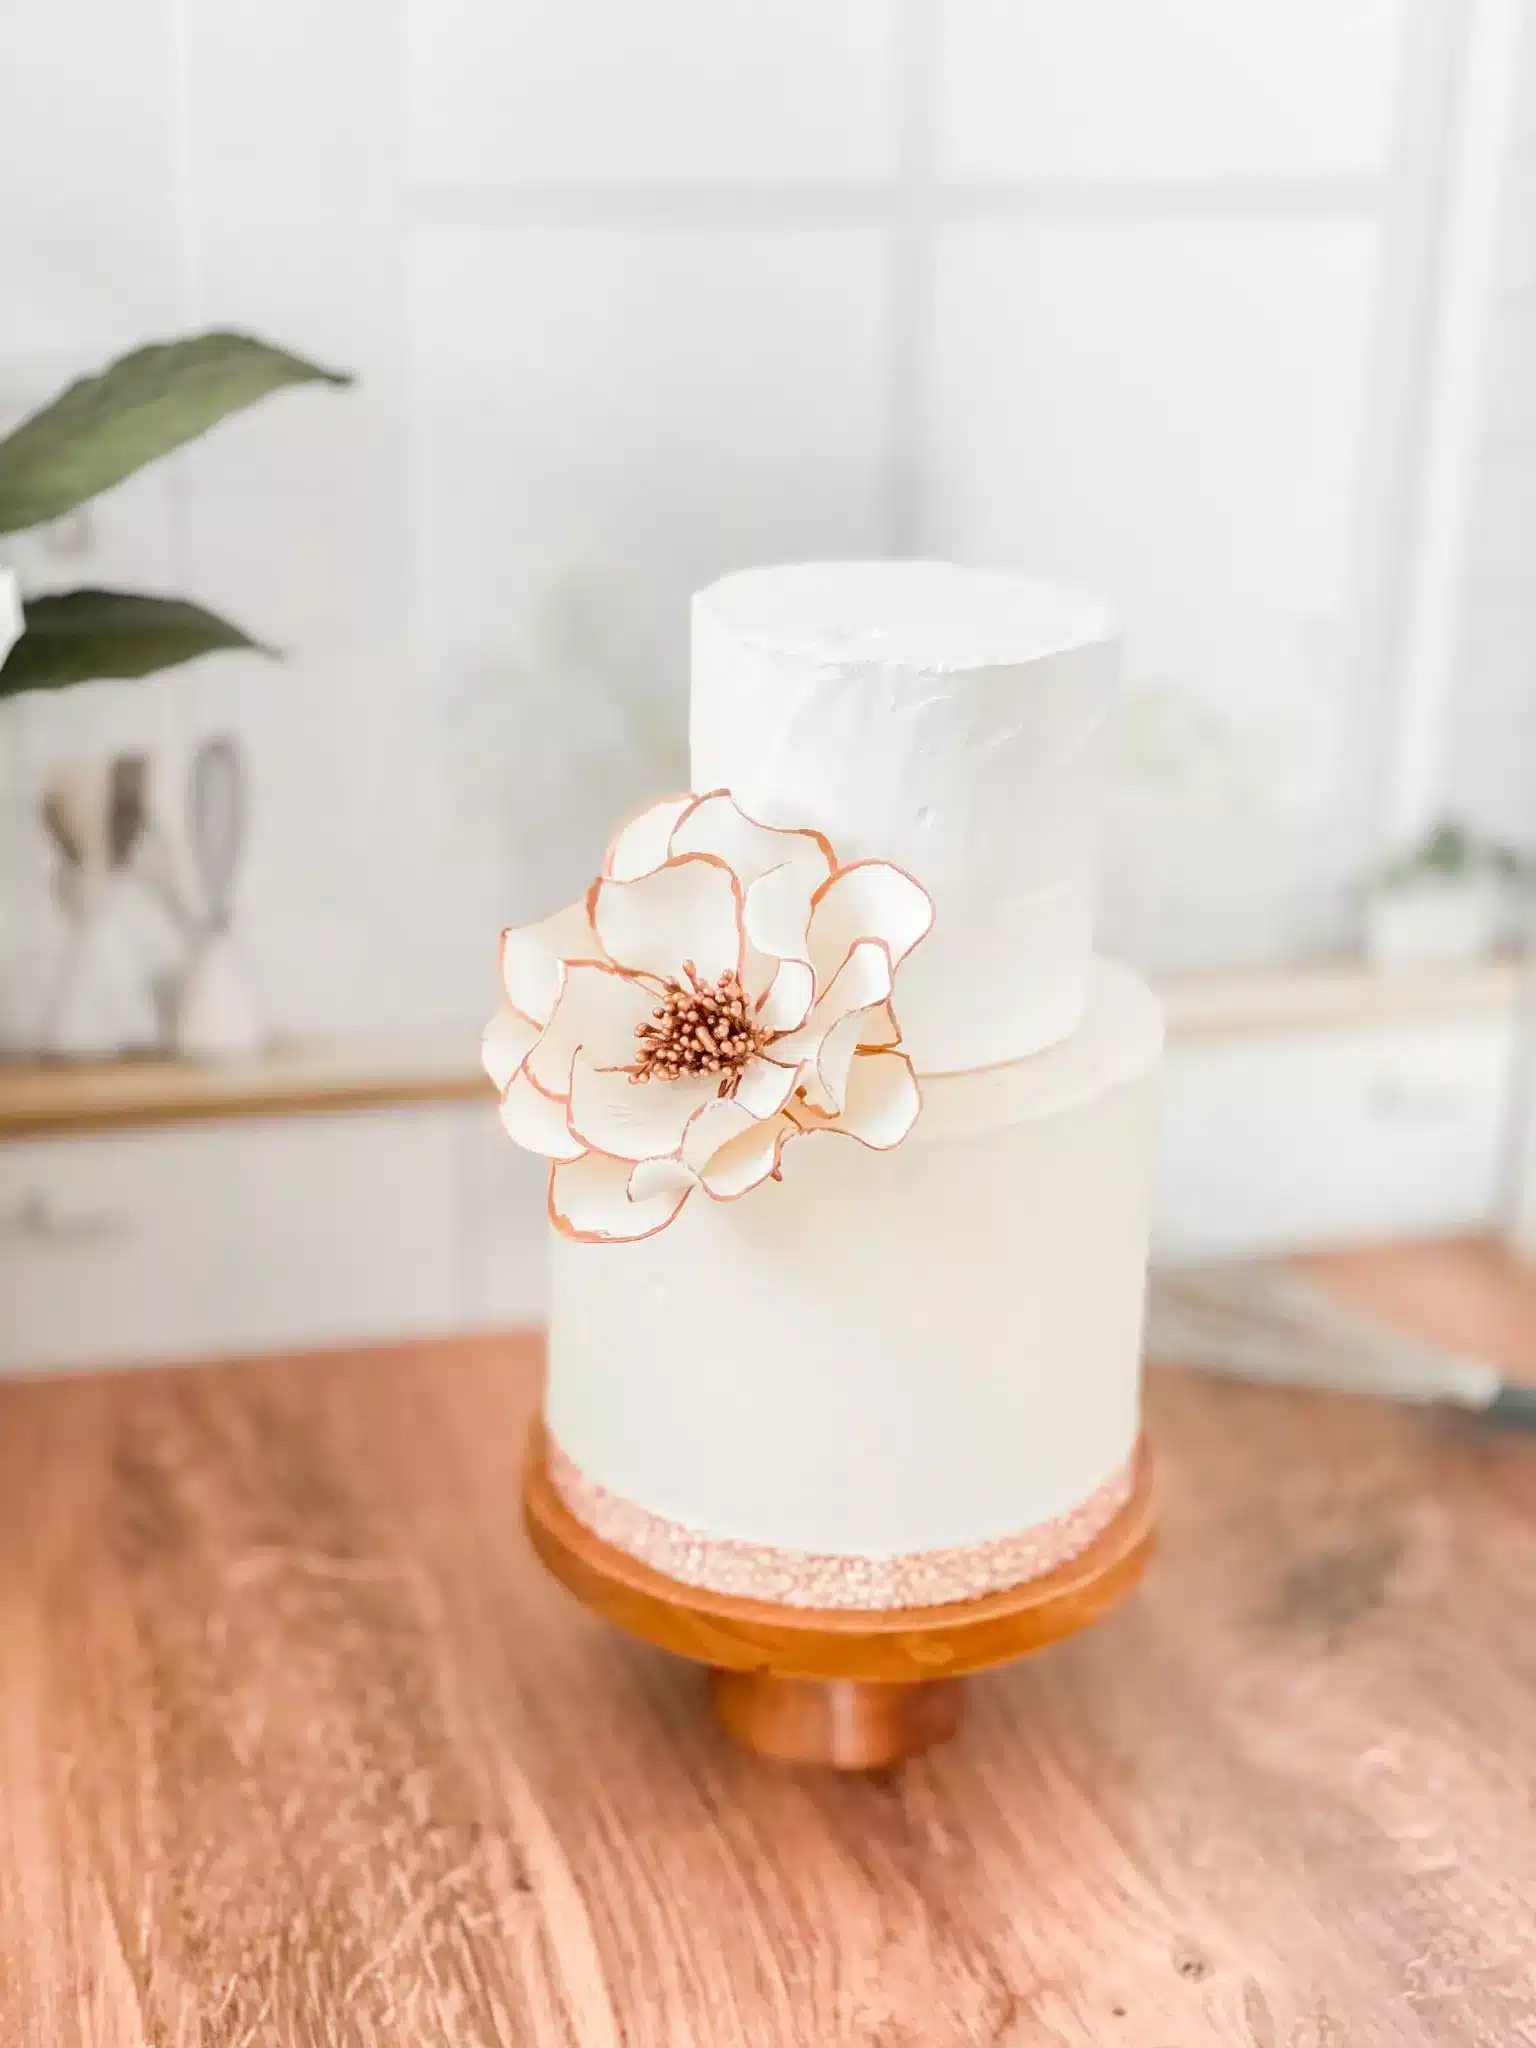 don't use sugar flowers if you can't keep them out of humidity!